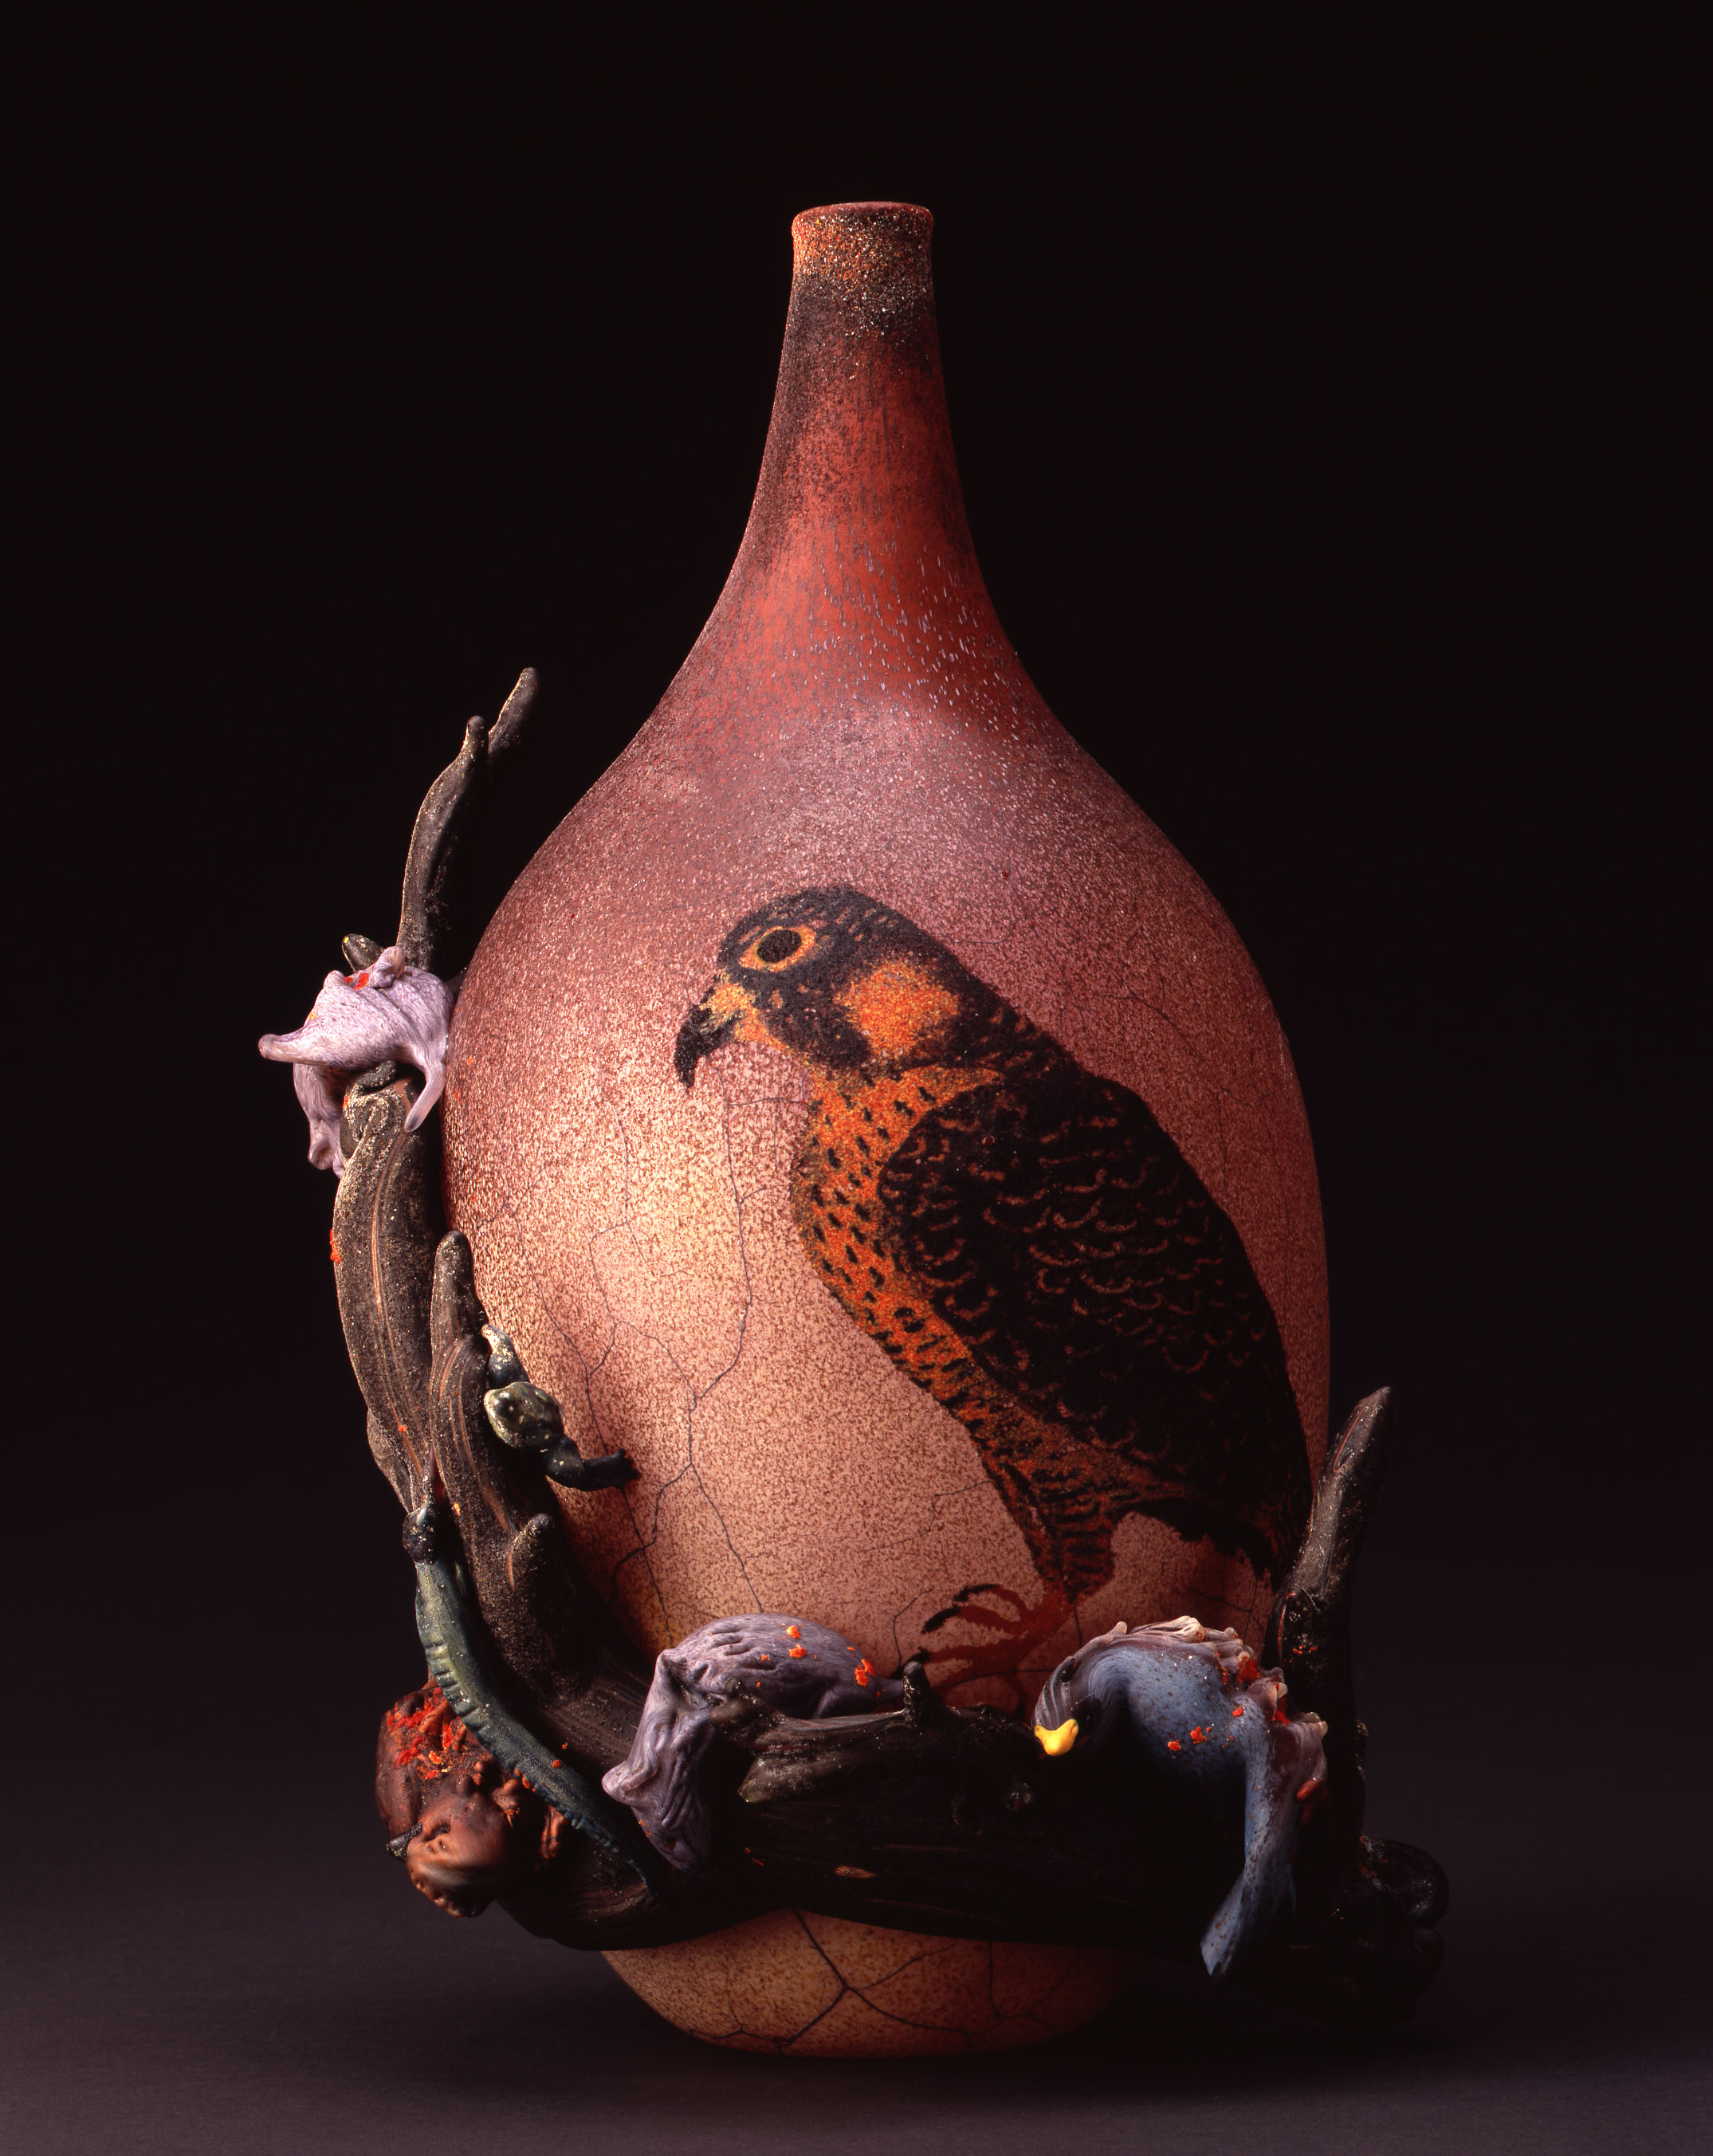  William Morris,  Vessel with Bird of Prey and Carrion,&nbsp; (2004, glass, 15 3/16 x 9 3/4 x 9 3/4 inches), WM.40 